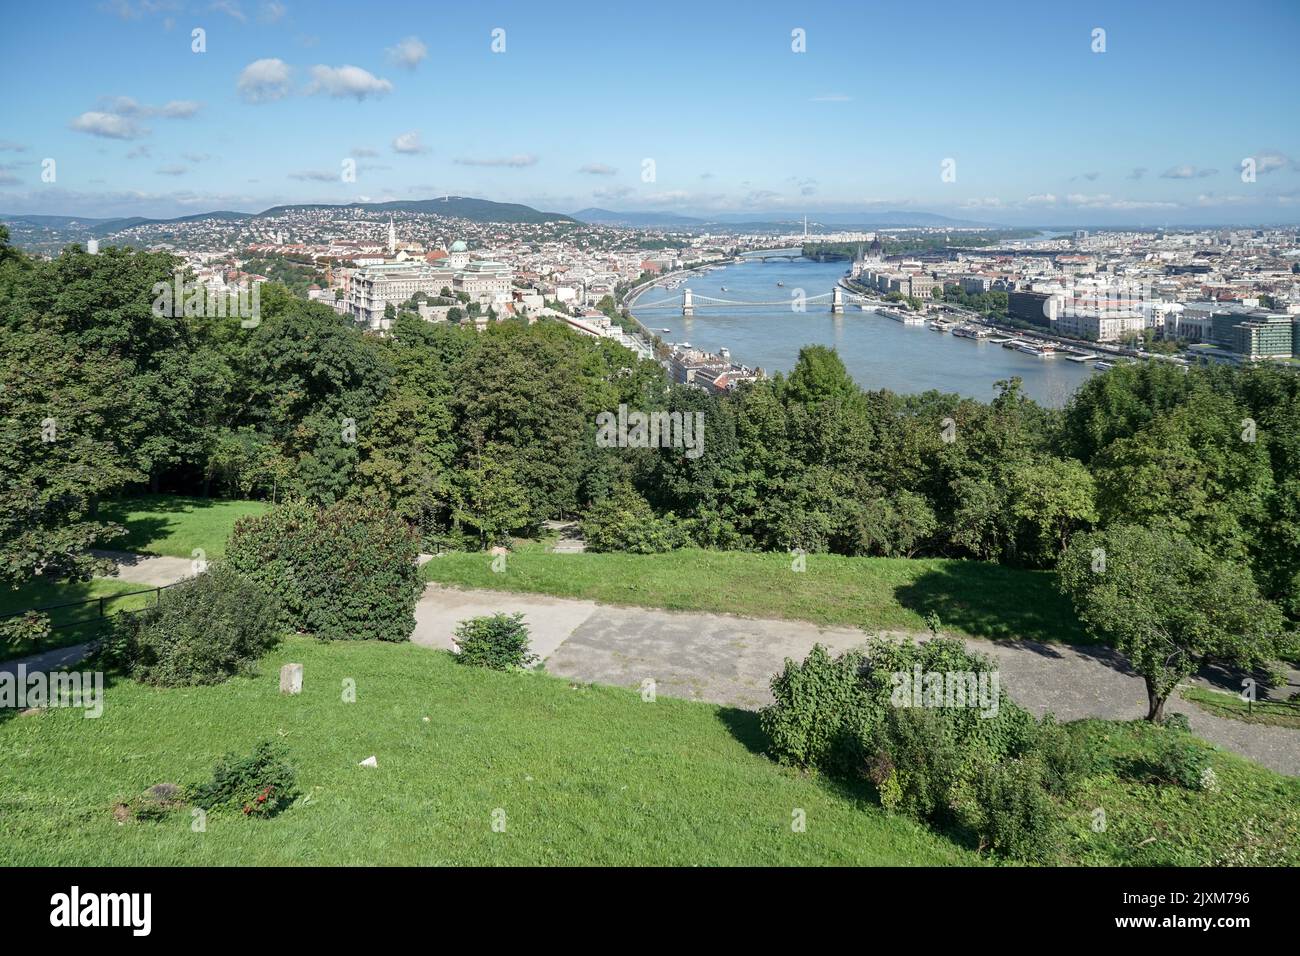 View across the river Danube in Budapest Stock Photo